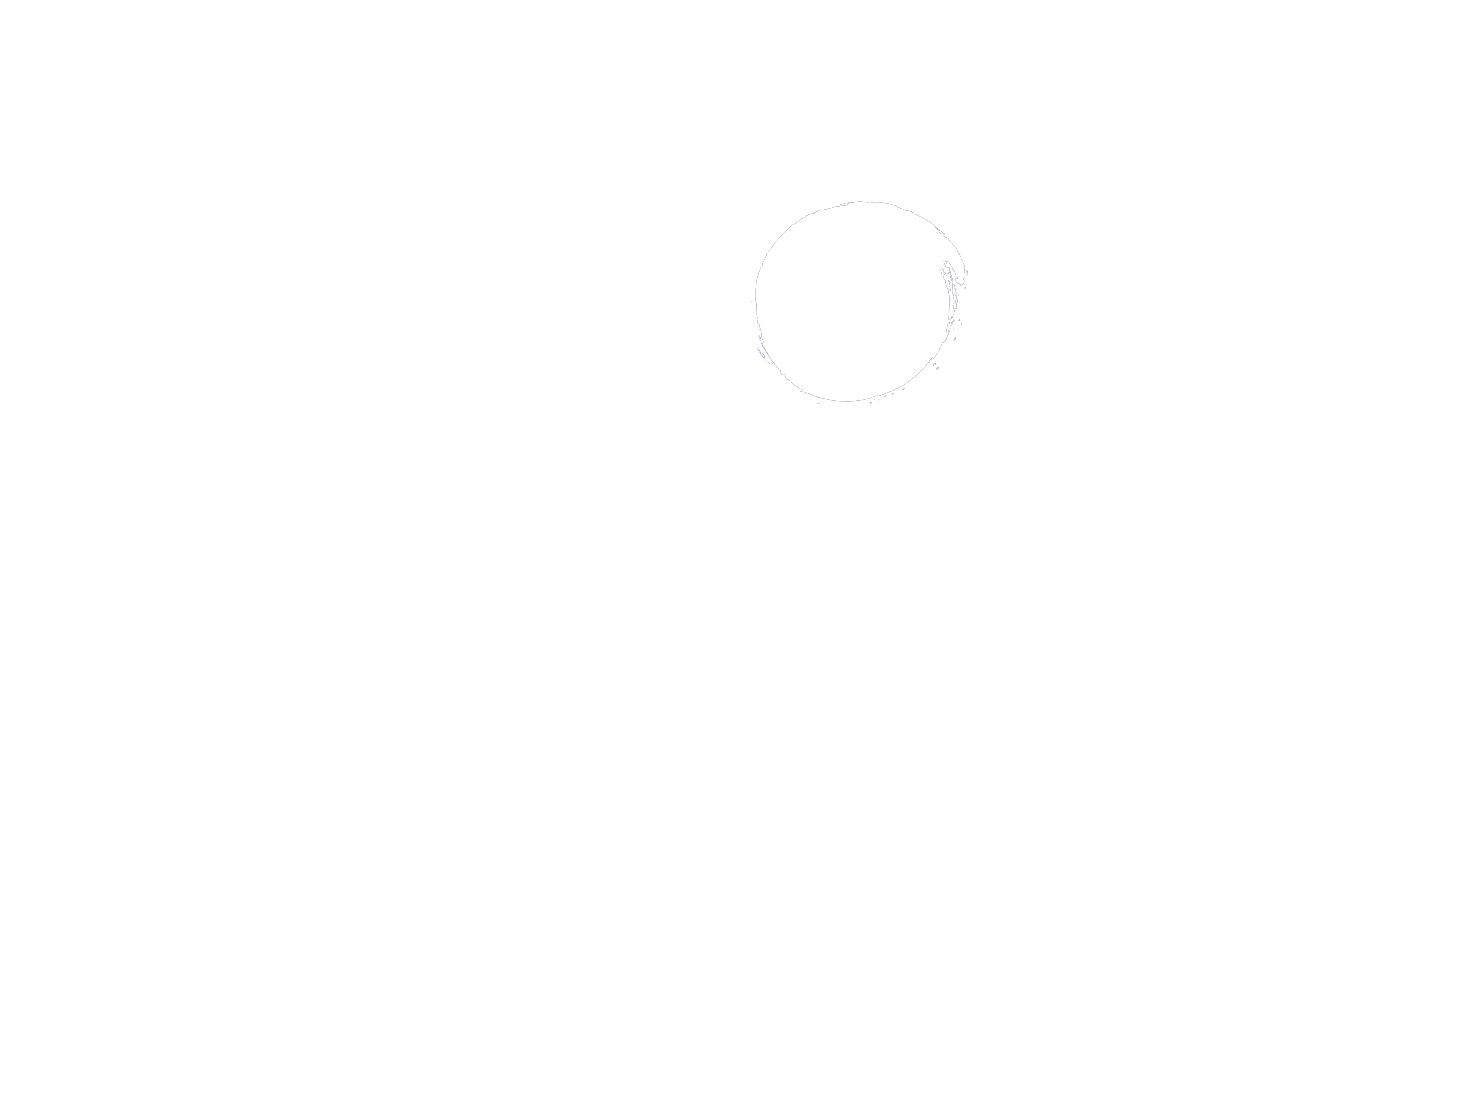 SafeNest - Temporary Assistance for Domestic Crisis, Inc.